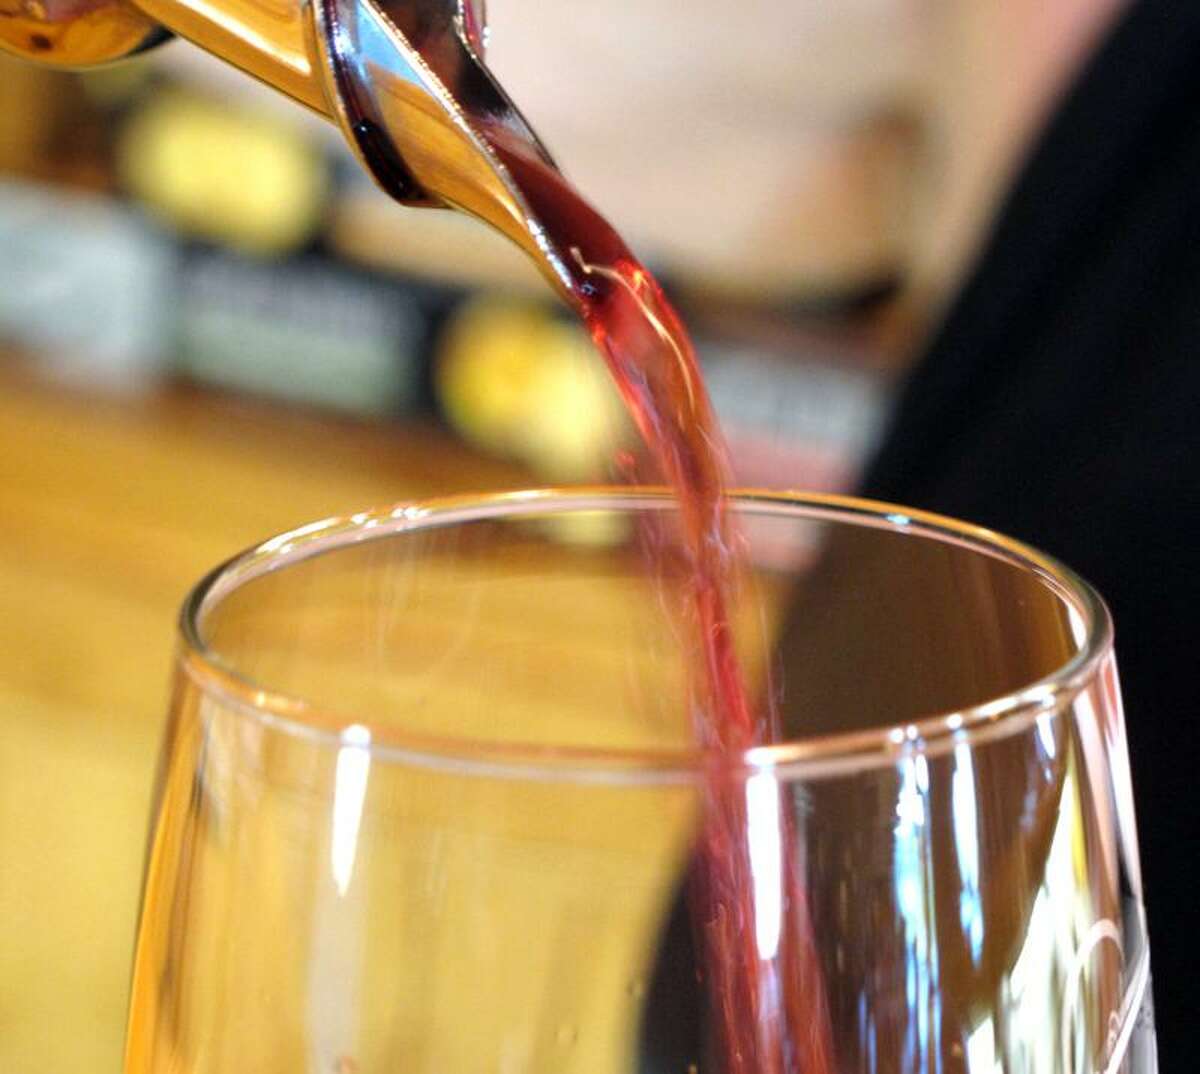 In this July 29, 2011 photo, a server pours a glass of Marquette wine into a tasting glass at the Richwood Winery in Richwood, Minn. Since it takes about three to four years for vines to mature, the Marquette wine has only recently hit store shelves.